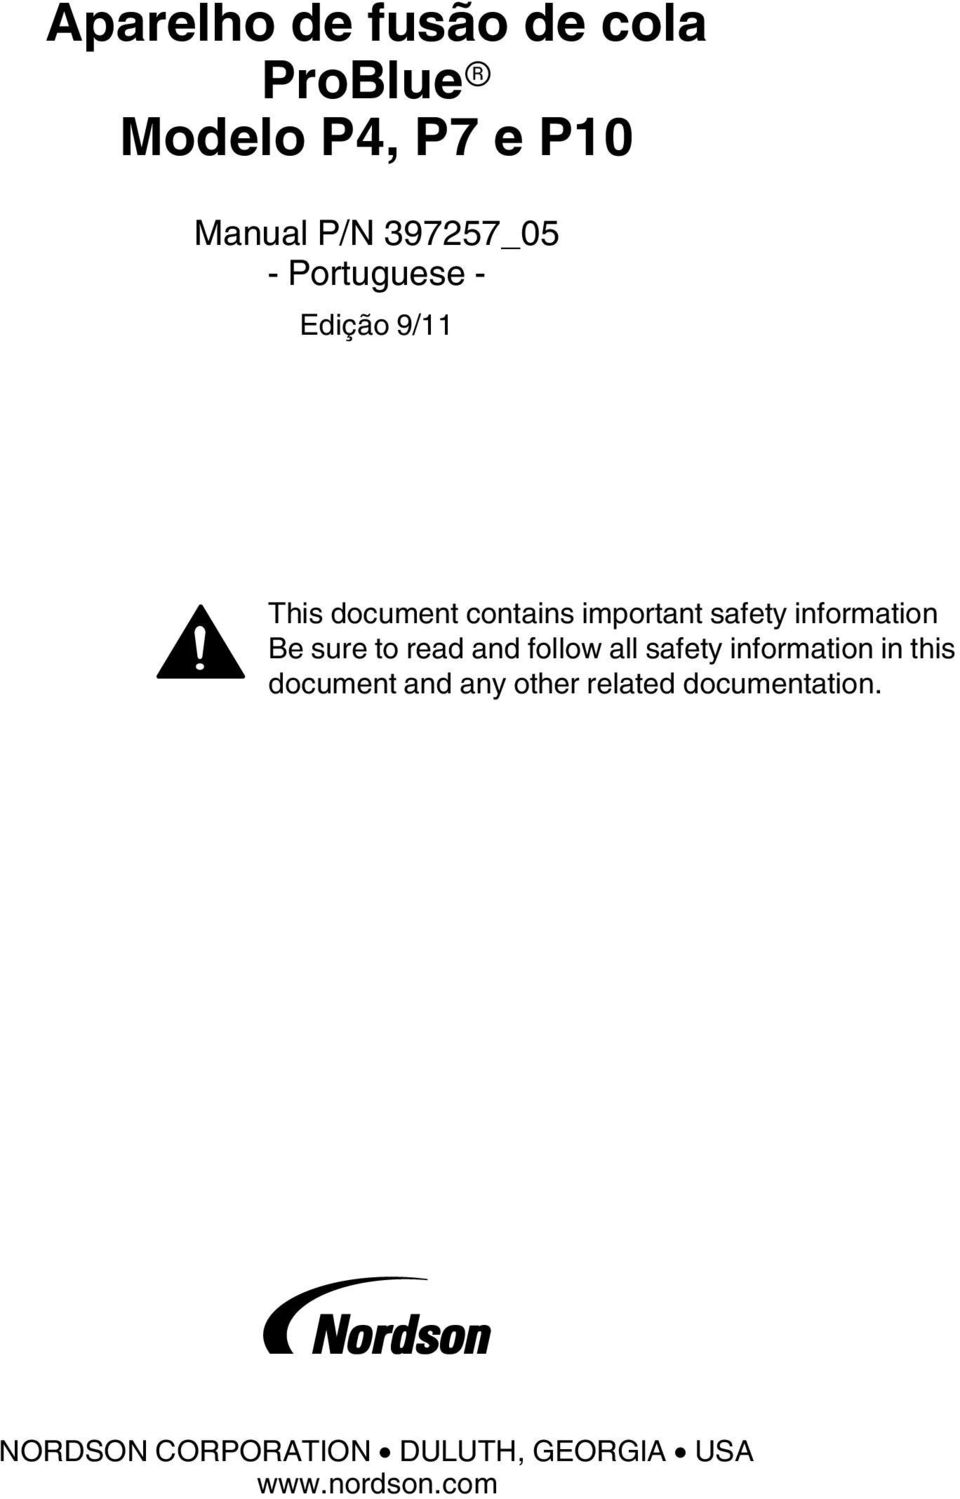 Be sure to read and follow all safety information in this document and any